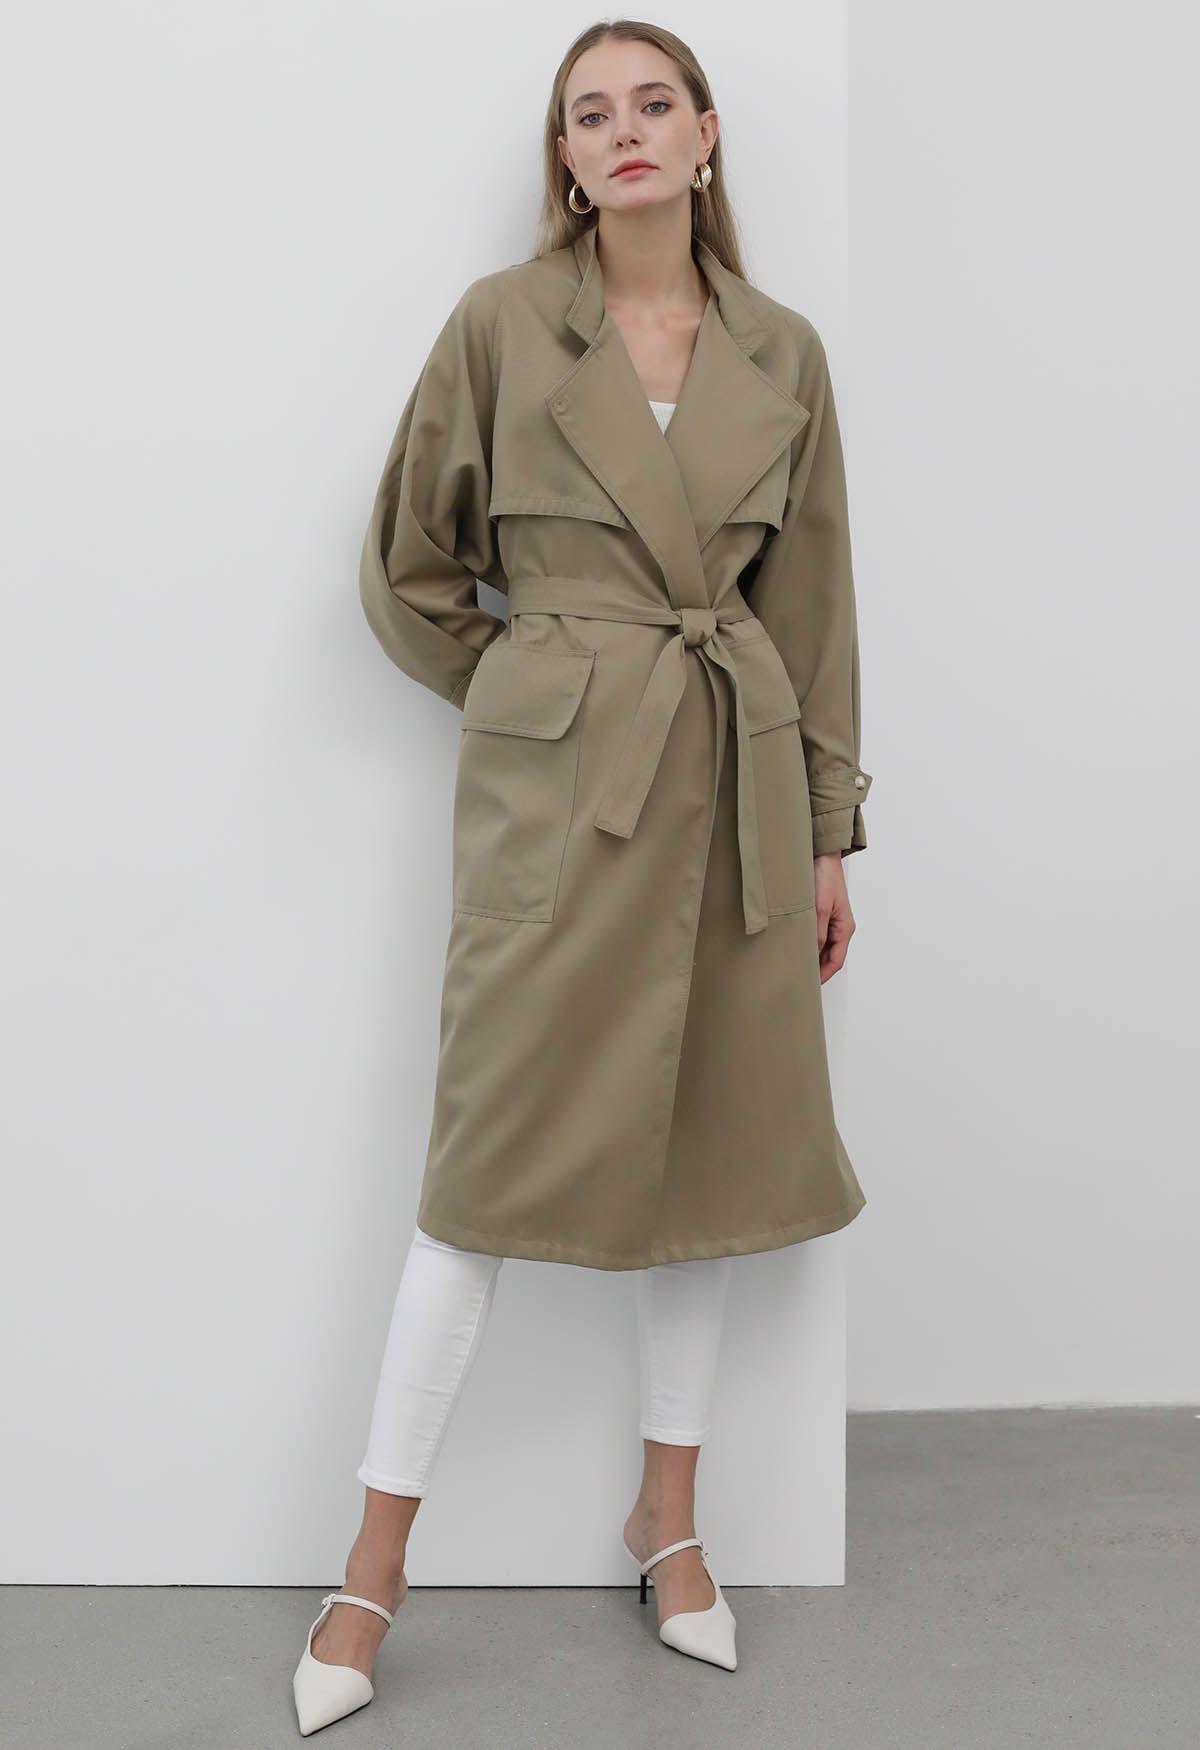 Ode to Autumn Belted Trench Coat in Khaki